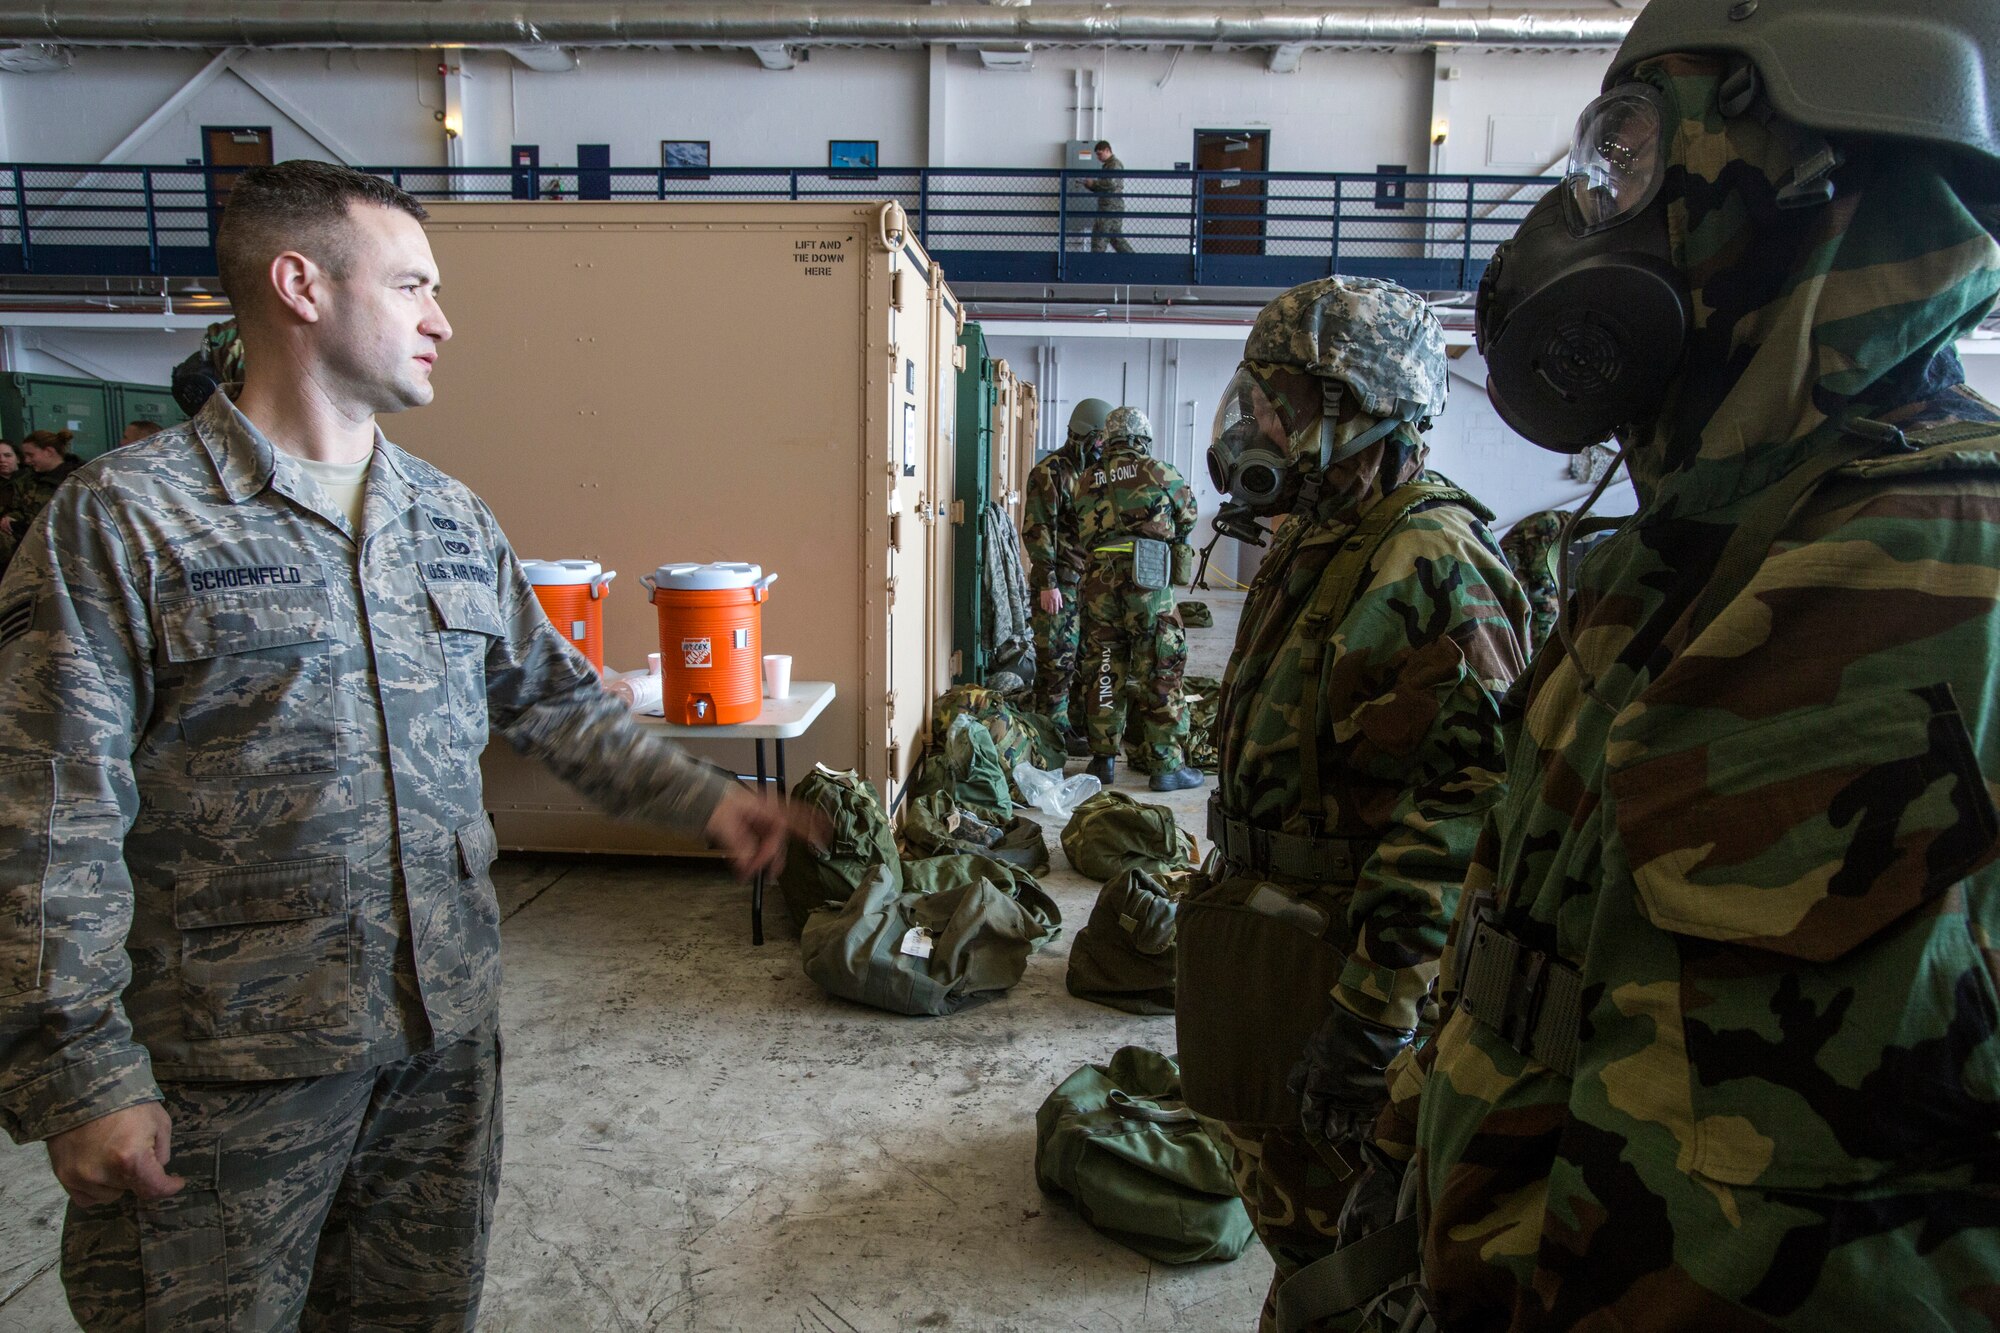 Senior Airman Seth L. Schoenfeld, left, Readiness and Emergency Management Flight, 108th Civil Engineer Squadron, 108th Wing, checks to see if Airmen have properly donned their M50 joint service general purpose masks and mission-oriented protective posture gear during the Wing’s Expeditionary Skills Rodeo at Joint Base McGuire-Dix-Lakehurst, N.J., March 7, 2015. In addition, they trained on their ability to survive and operate in a chemical, biological, radiological and nuclear environment. These skills make up the foundation necessary for all Airmen to function effectively in hostile environments. (U.S. Air National Guard photo by Master Sgt. Mark C. Olsen/Released)